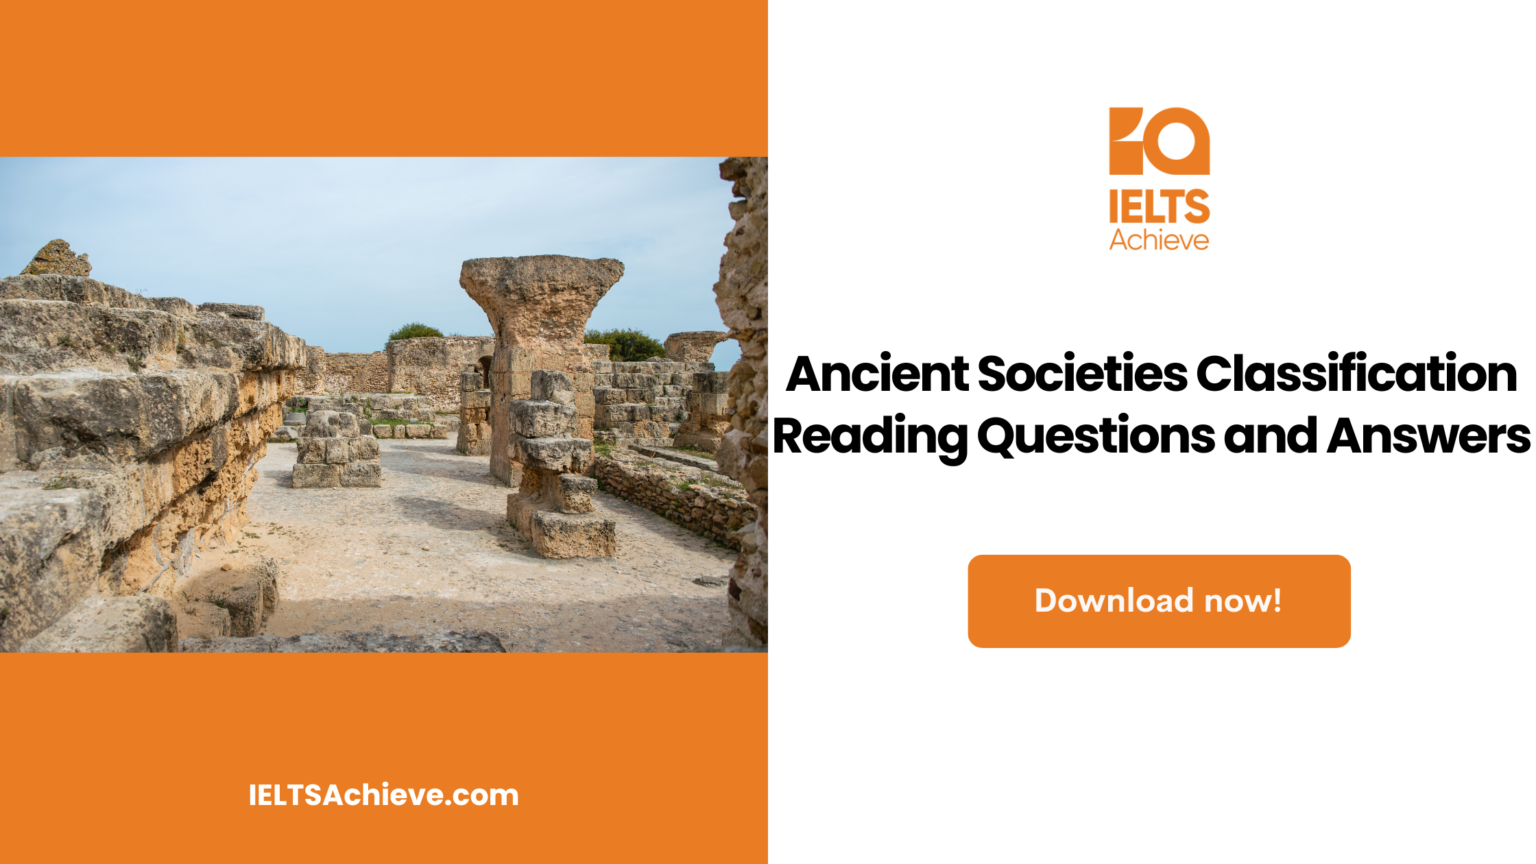 Ancient Societies Classification Reading Questions and Answers